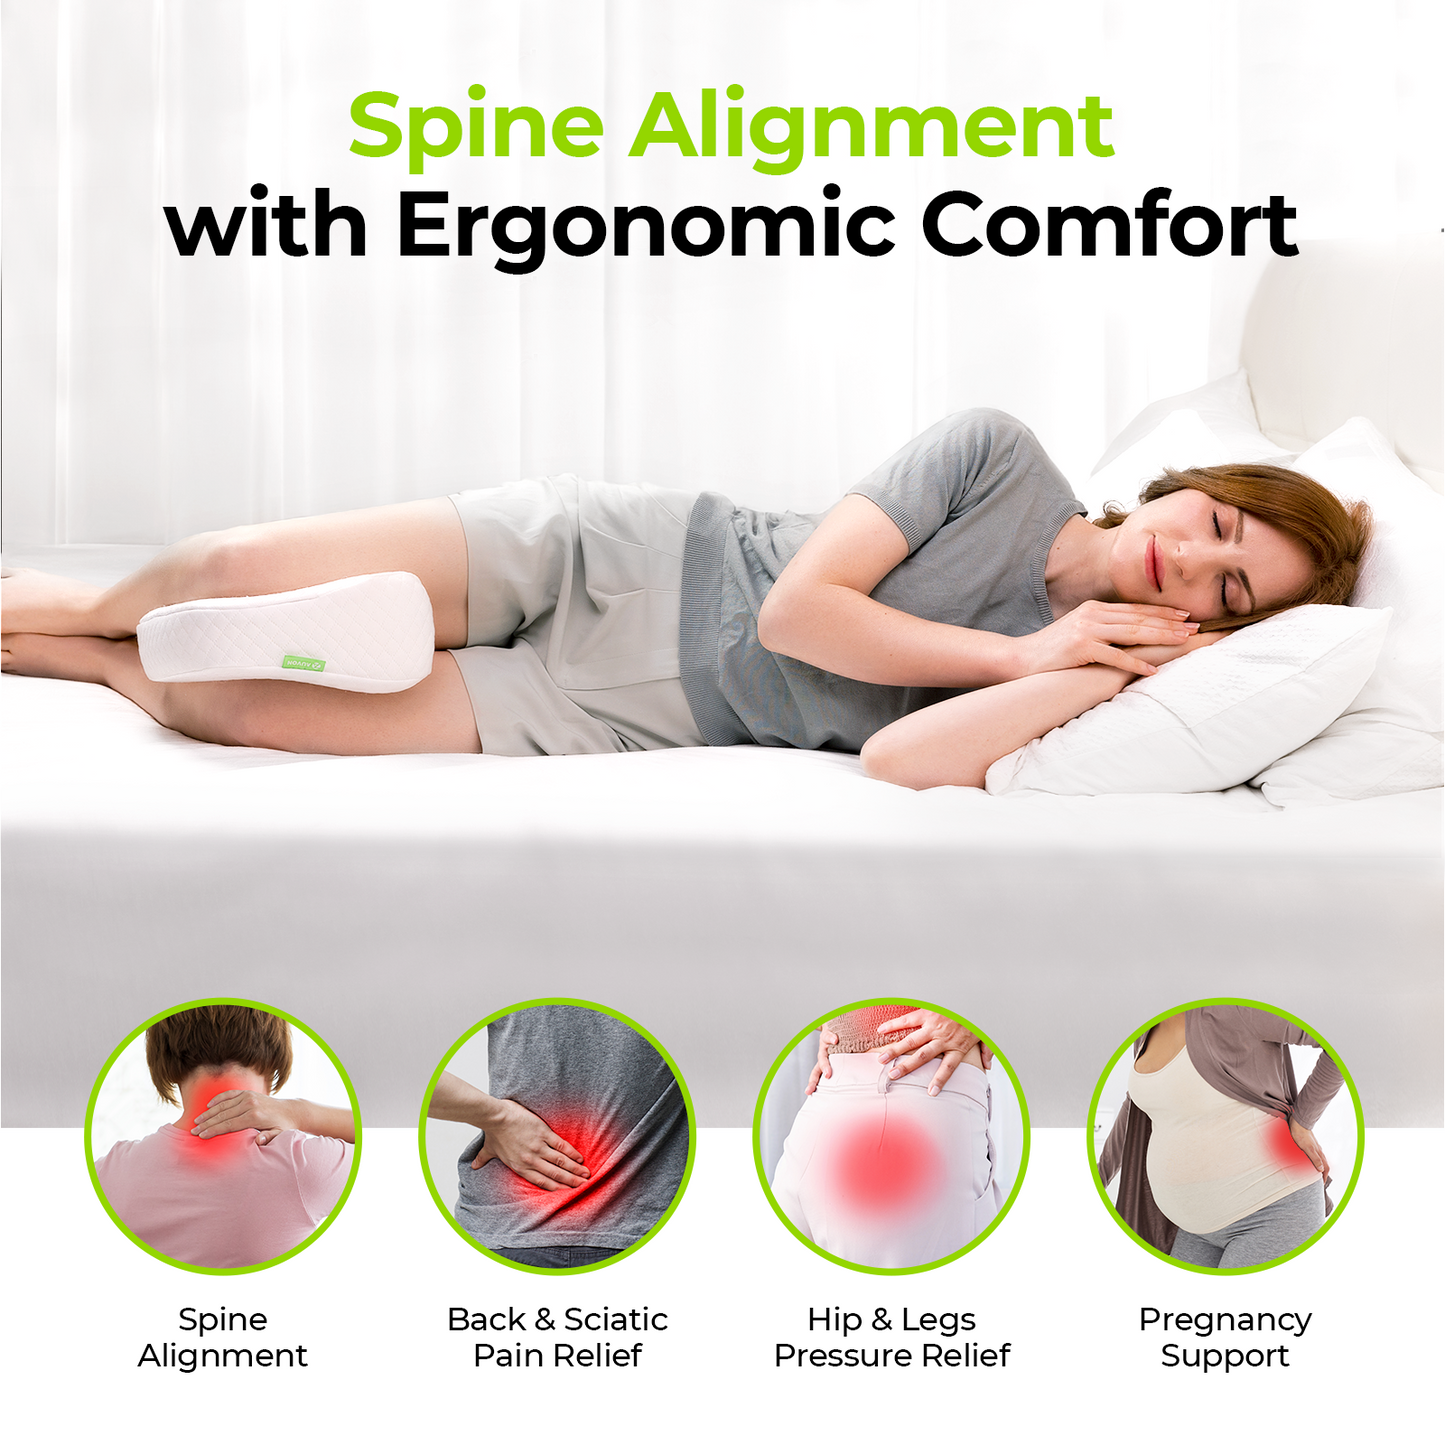 AUVON Cooling Leg & Knee Foam Support Pillow with Ice Silky Fabric, Enhanced Support Memory Foam Hip Pillow for Side Sleepers to Spine Alignment, Relieve Back Pain, Knee Joints & Sciatica Pain